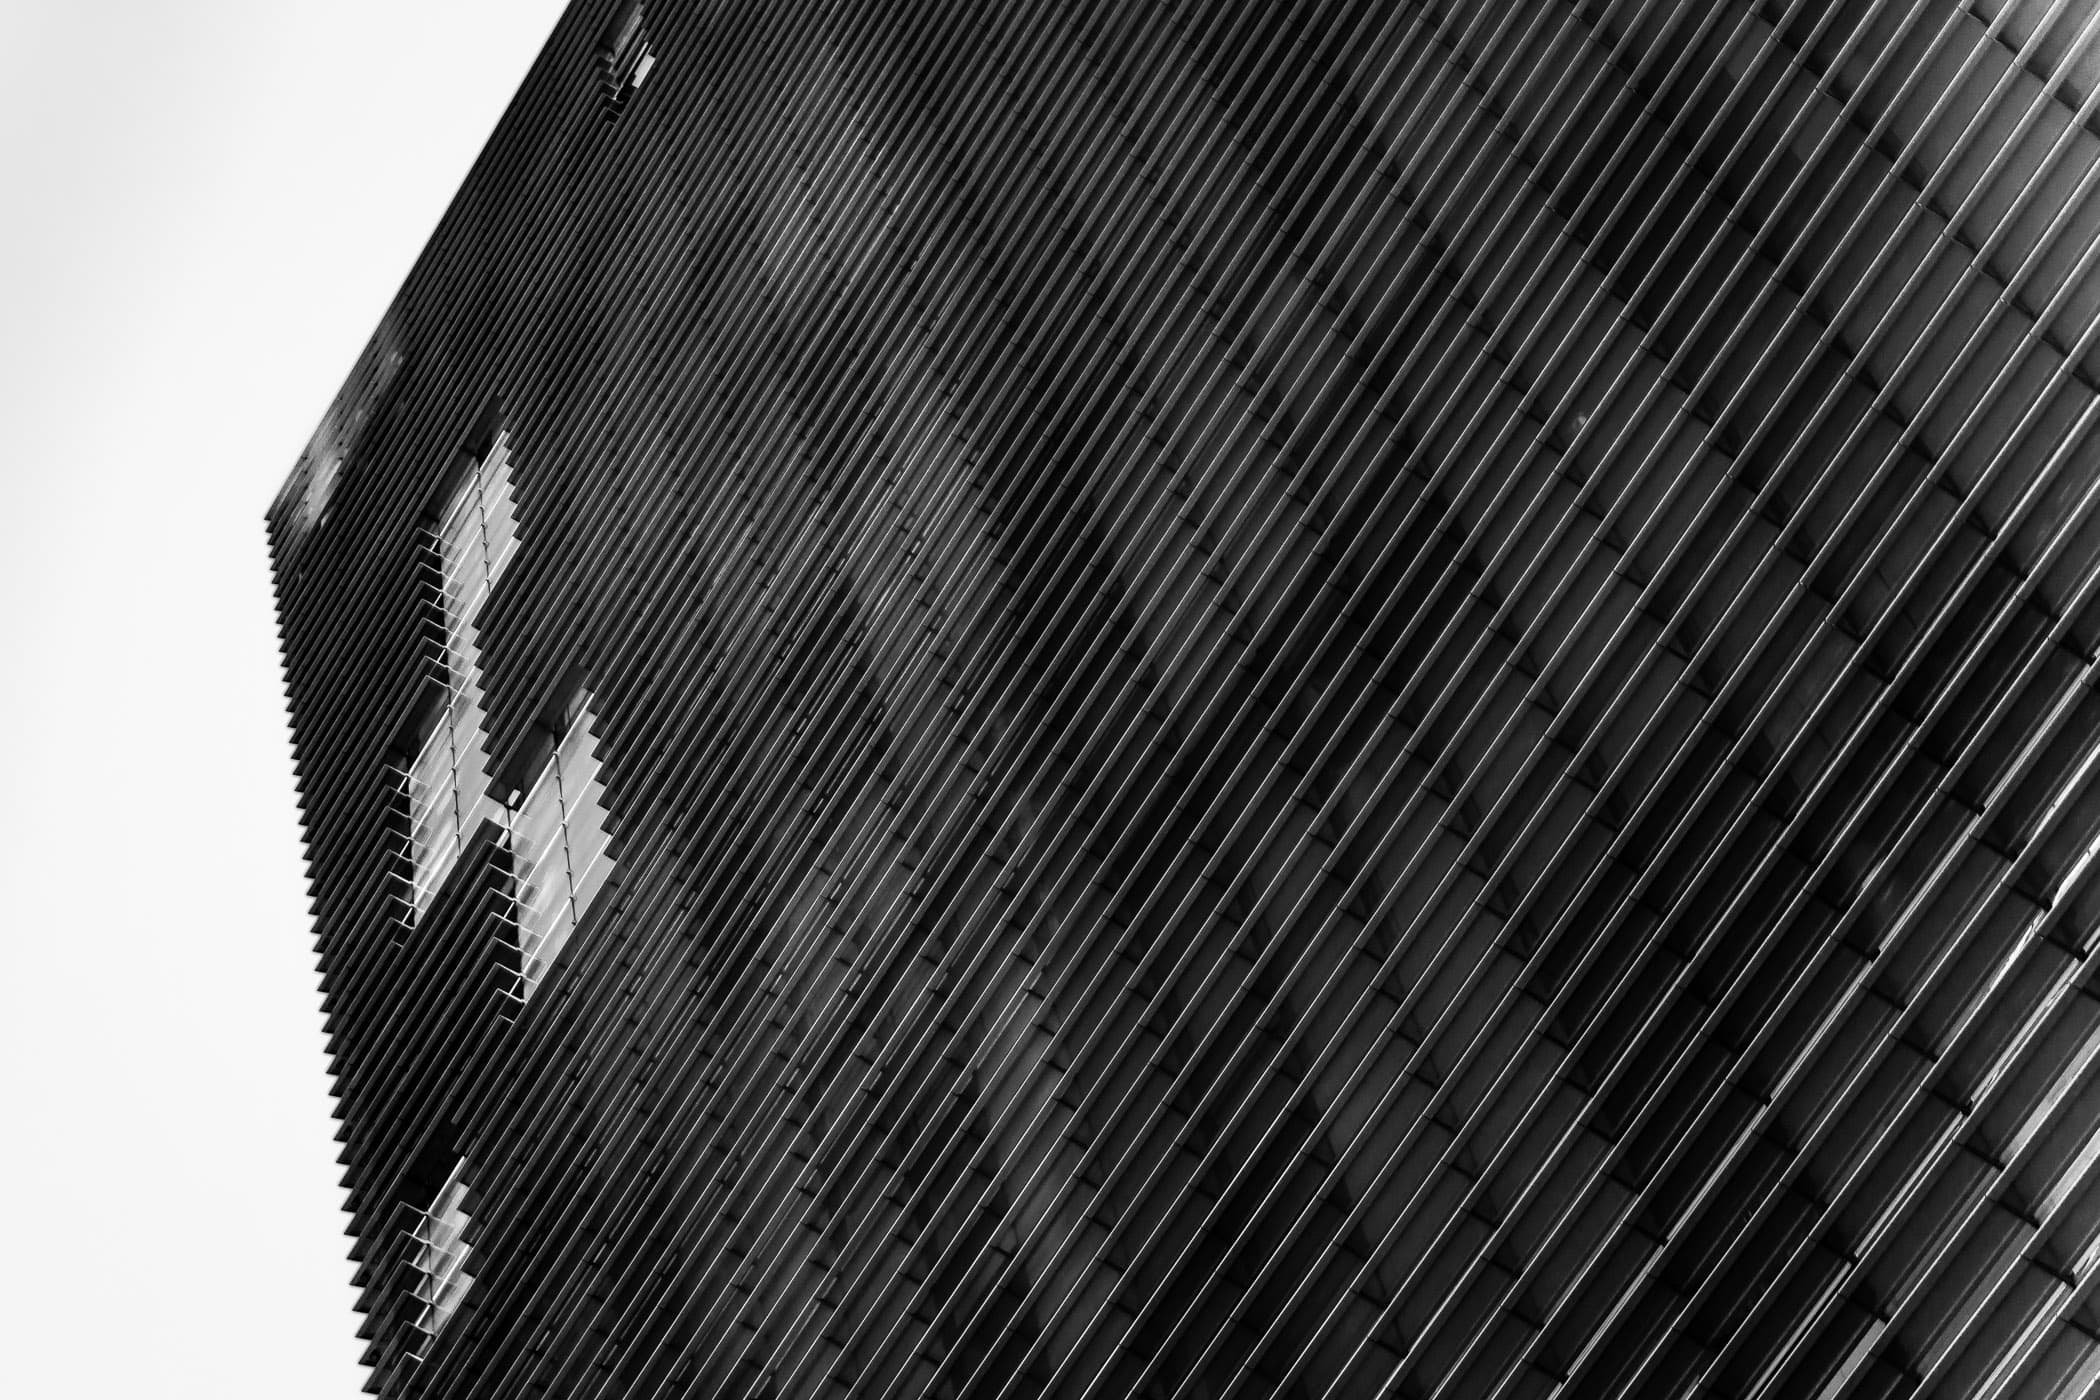 Exterior detail of the one of the Veer Towers, CityCenter, Las Vegas.